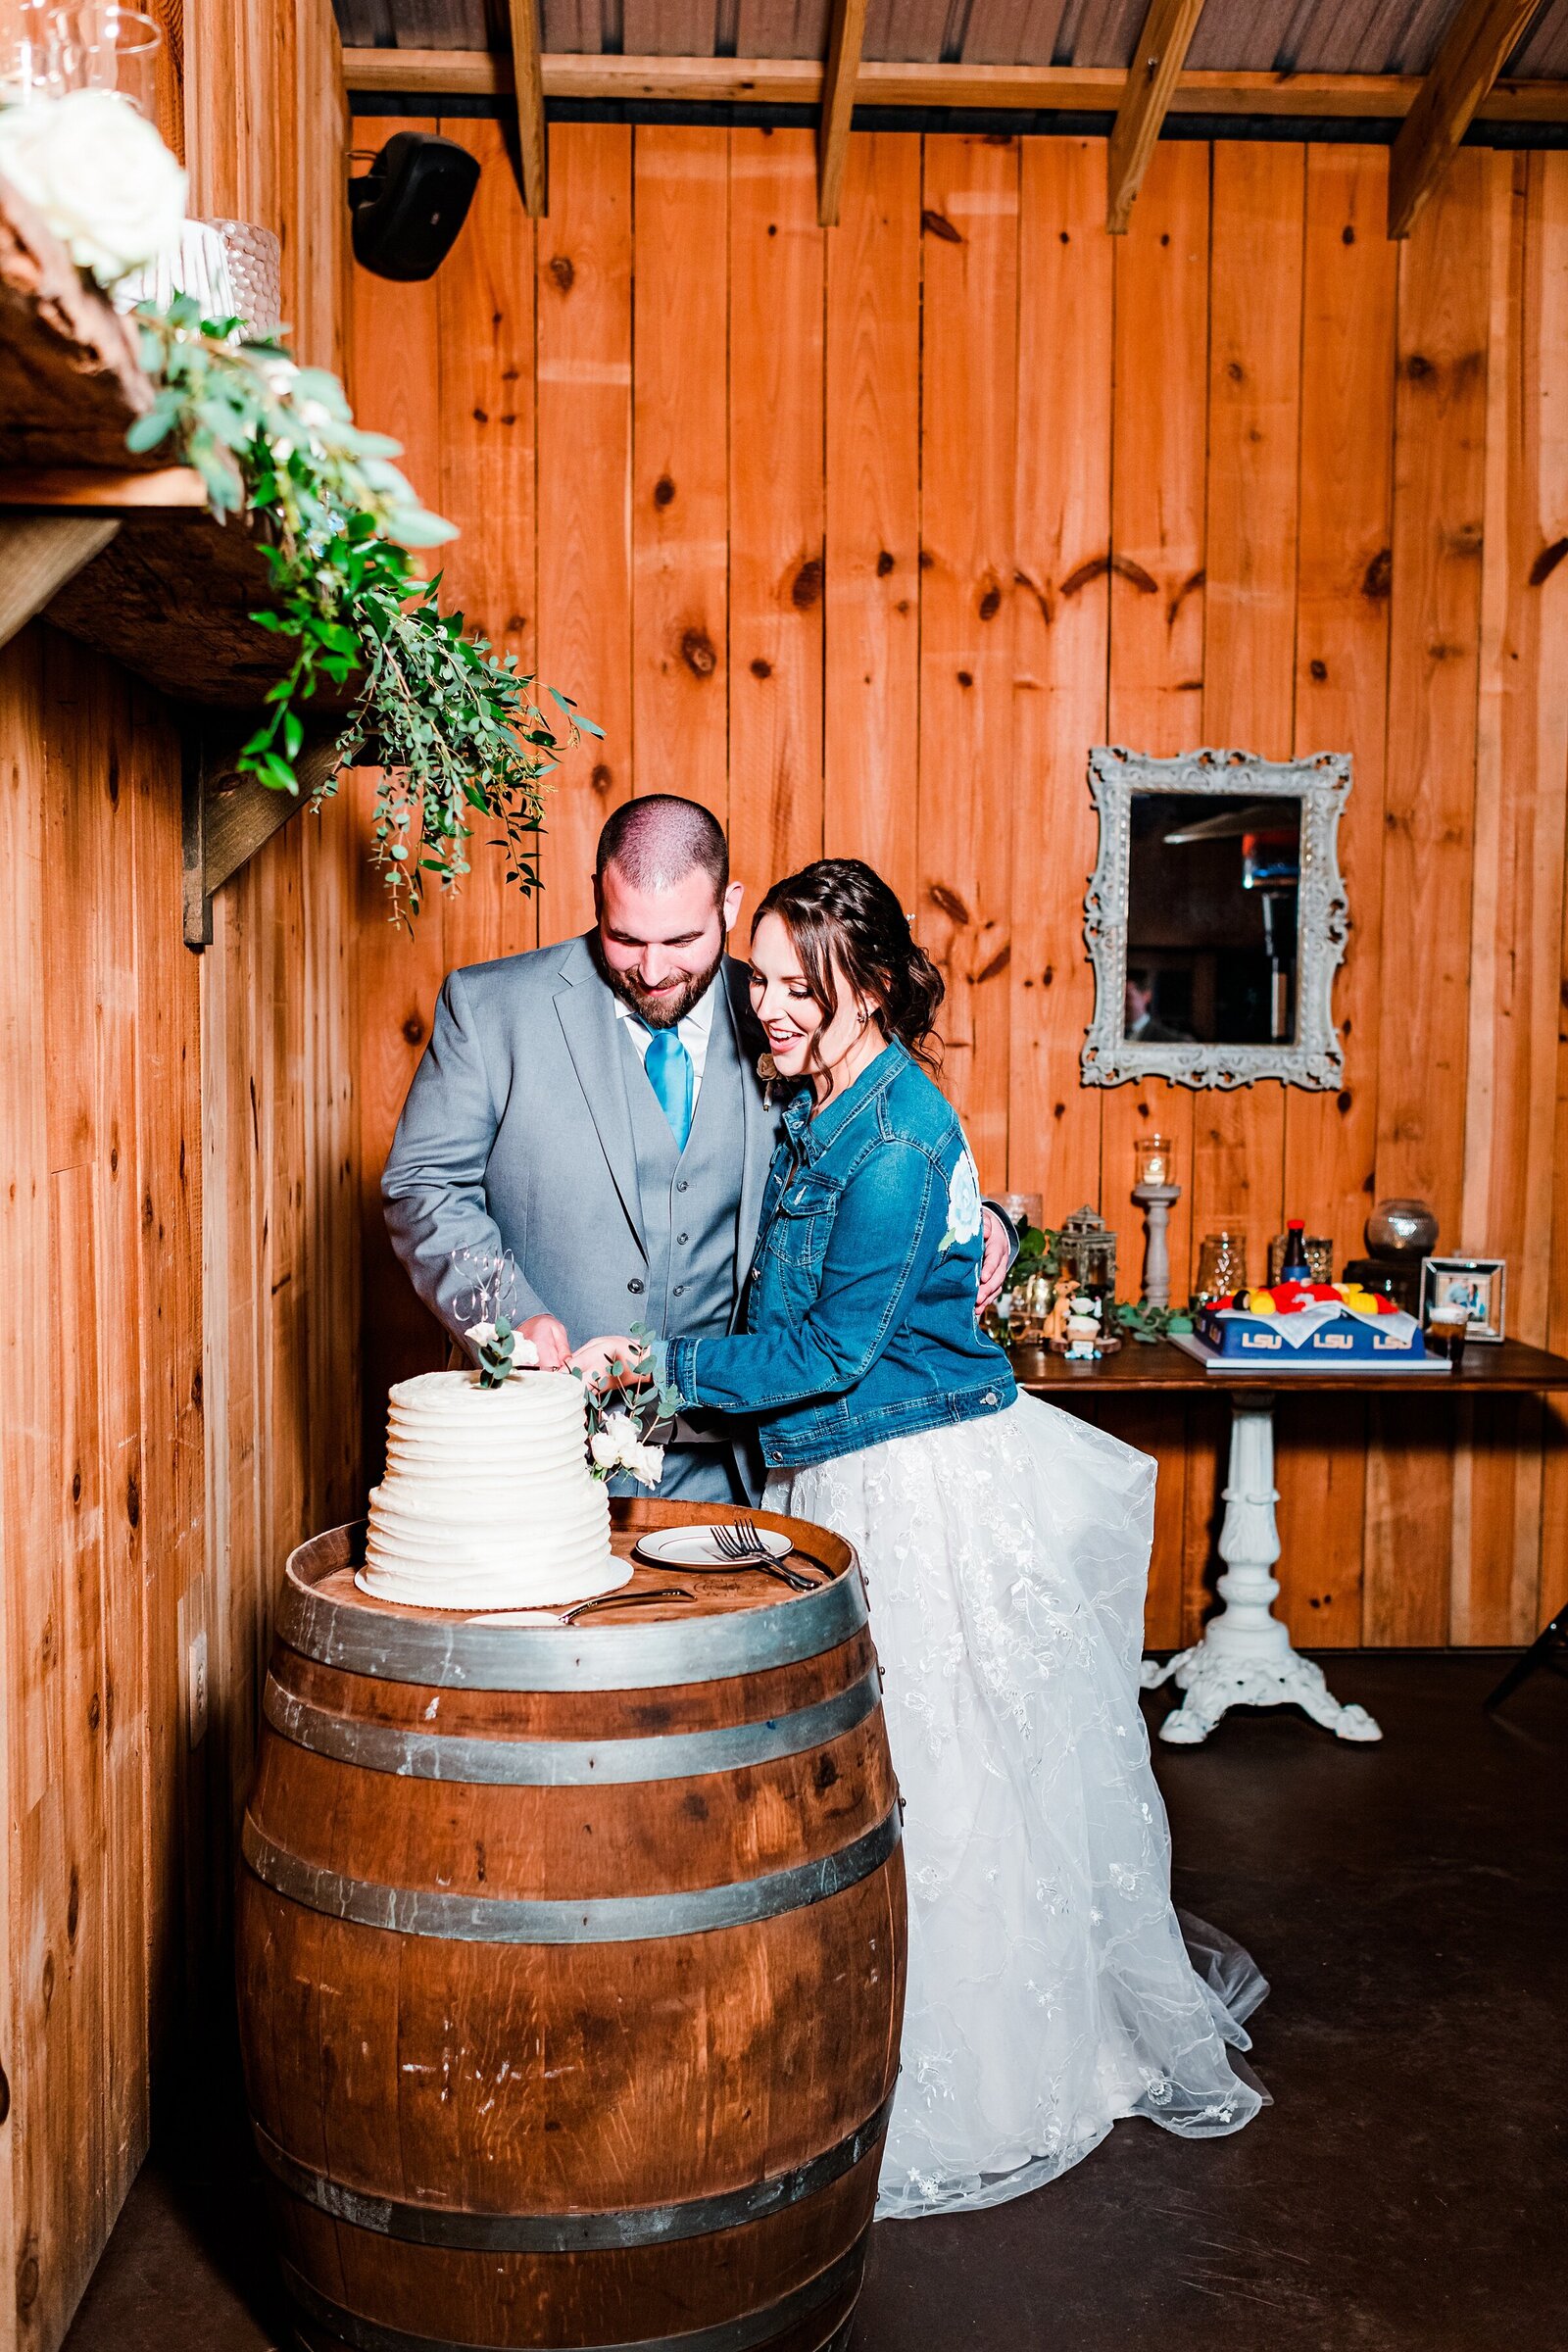 Cake Cutting at Reception | The Delamater House Wedding | Chynna Pacheco Photography-1010